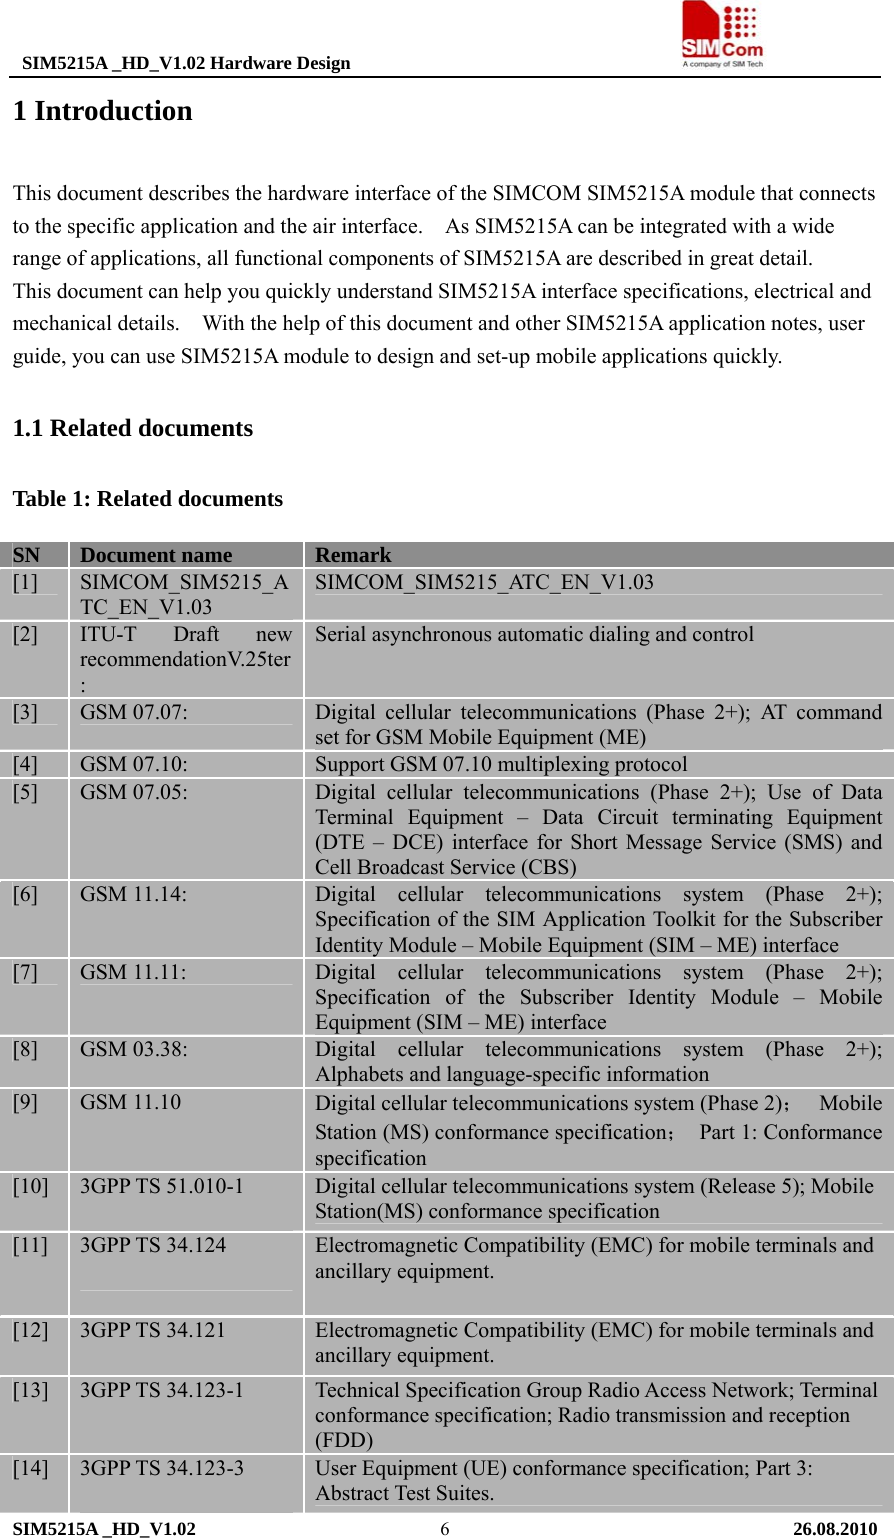  SIM5215A _HD_V1.02 Hardware Design                                     SIM5215A _HD_V1.02   26.08.2010   61 Introduction This document describes the hardware interface of the SIMCOM SIM5215A module that connects to the specific application and the air interface.    As SIM5215A can be integrated with a wide range of applications, all functional components of SIM5215A are described in great detail.   This document can help you quickly understand SIM5215A interface specifications, electrical and mechanical details.    With the help of this document and other SIM5215A application notes, user guide, you can use SIM5215A module to design and set-up mobile applications quickly. 1.1 Related documents Table 1: Related documents SN  Document name  Remark [1]  SIMCOM_SIM5215_ATC_EN_V1.03 SIMCOM_SIM5215_ATC_EN_V1.03 [2]  ITU-T Draft new recommendationV.25ter: Serial asynchronous automatic dialing and control [3]  GSM 07.07:  Digital cellular telecommunications (Phase 2+); AT command set for GSM Mobile Equipment (ME) [4]  GSM 07.10:  Support GSM 07.10 multiplexing protocol   [5]  GSM 07.05:  Digital cellular telecommunications (Phase 2+); Use of Data Terminal Equipment – Data Circuit terminating Equipment (DTE – DCE) interface for Short Message Service (SMS) and Cell Broadcast Service (CBS) [6]  GSM 11.14:  Digital cellular telecommunications system (Phase 2+); Specification of the SIM Application Toolkit for the Subscriber Identity Module – Mobile Equipment (SIM – ME) interface [7]  GSM 11.11:  Digital cellular telecommunications system (Phase 2+); Specification of the Subscriber Identity Module – Mobile Equipment (SIM – ME) interface [8]  GSM 03.38:  Digital cellular telecommunications system (Phase 2+); Alphabets and language-specific information [9]  GSM 11.10  Digital cellular telecommunications system (Phase 2)；  Mobile Station (MS) conformance specification； Part 1: Conformance specification [10]  3GPP TS 51.010-1  Digital cellular telecommunications system (Release 5); Mobile Station(MS) conformance specification [11]  3GPP TS 34.124  Electromagnetic Compatibility (EMC) for mobile terminals and ancillary equipment.  [12]  3GPP TS 34.121  Electromagnetic Compatibility (EMC) for mobile terminals and ancillary equipment. [13]  3GPP TS 34.123-1  Technical Specification Group Radio Access Network; Terminal conformance specification; Radio transmission and reception (FDD) [14]  3GPP TS 34.123-3  User Equipment (UE) conformance specification; Part 3: Abstract Test Suites. 